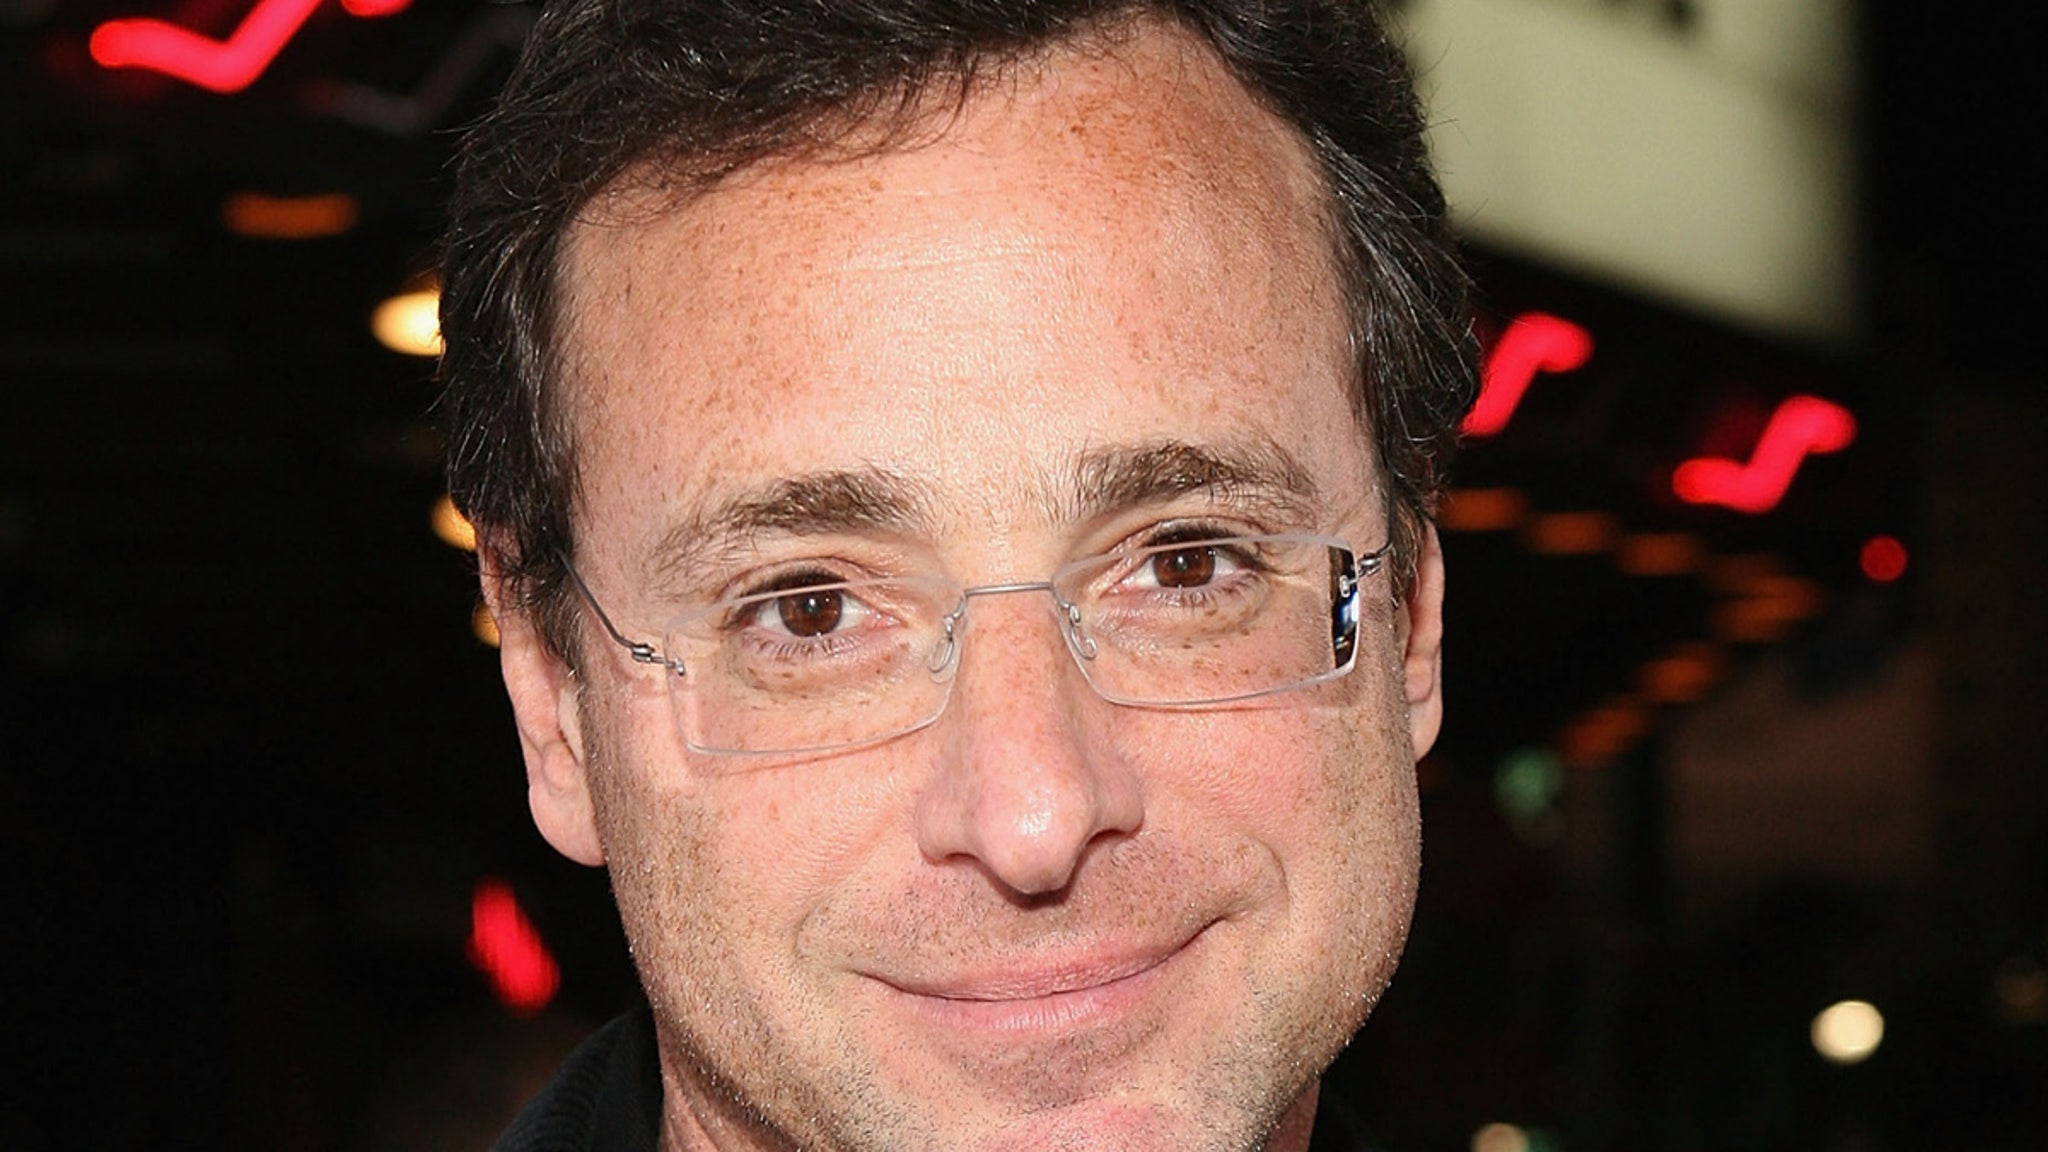 Bob Saget Apparently Died in His Sleep, No Suffering